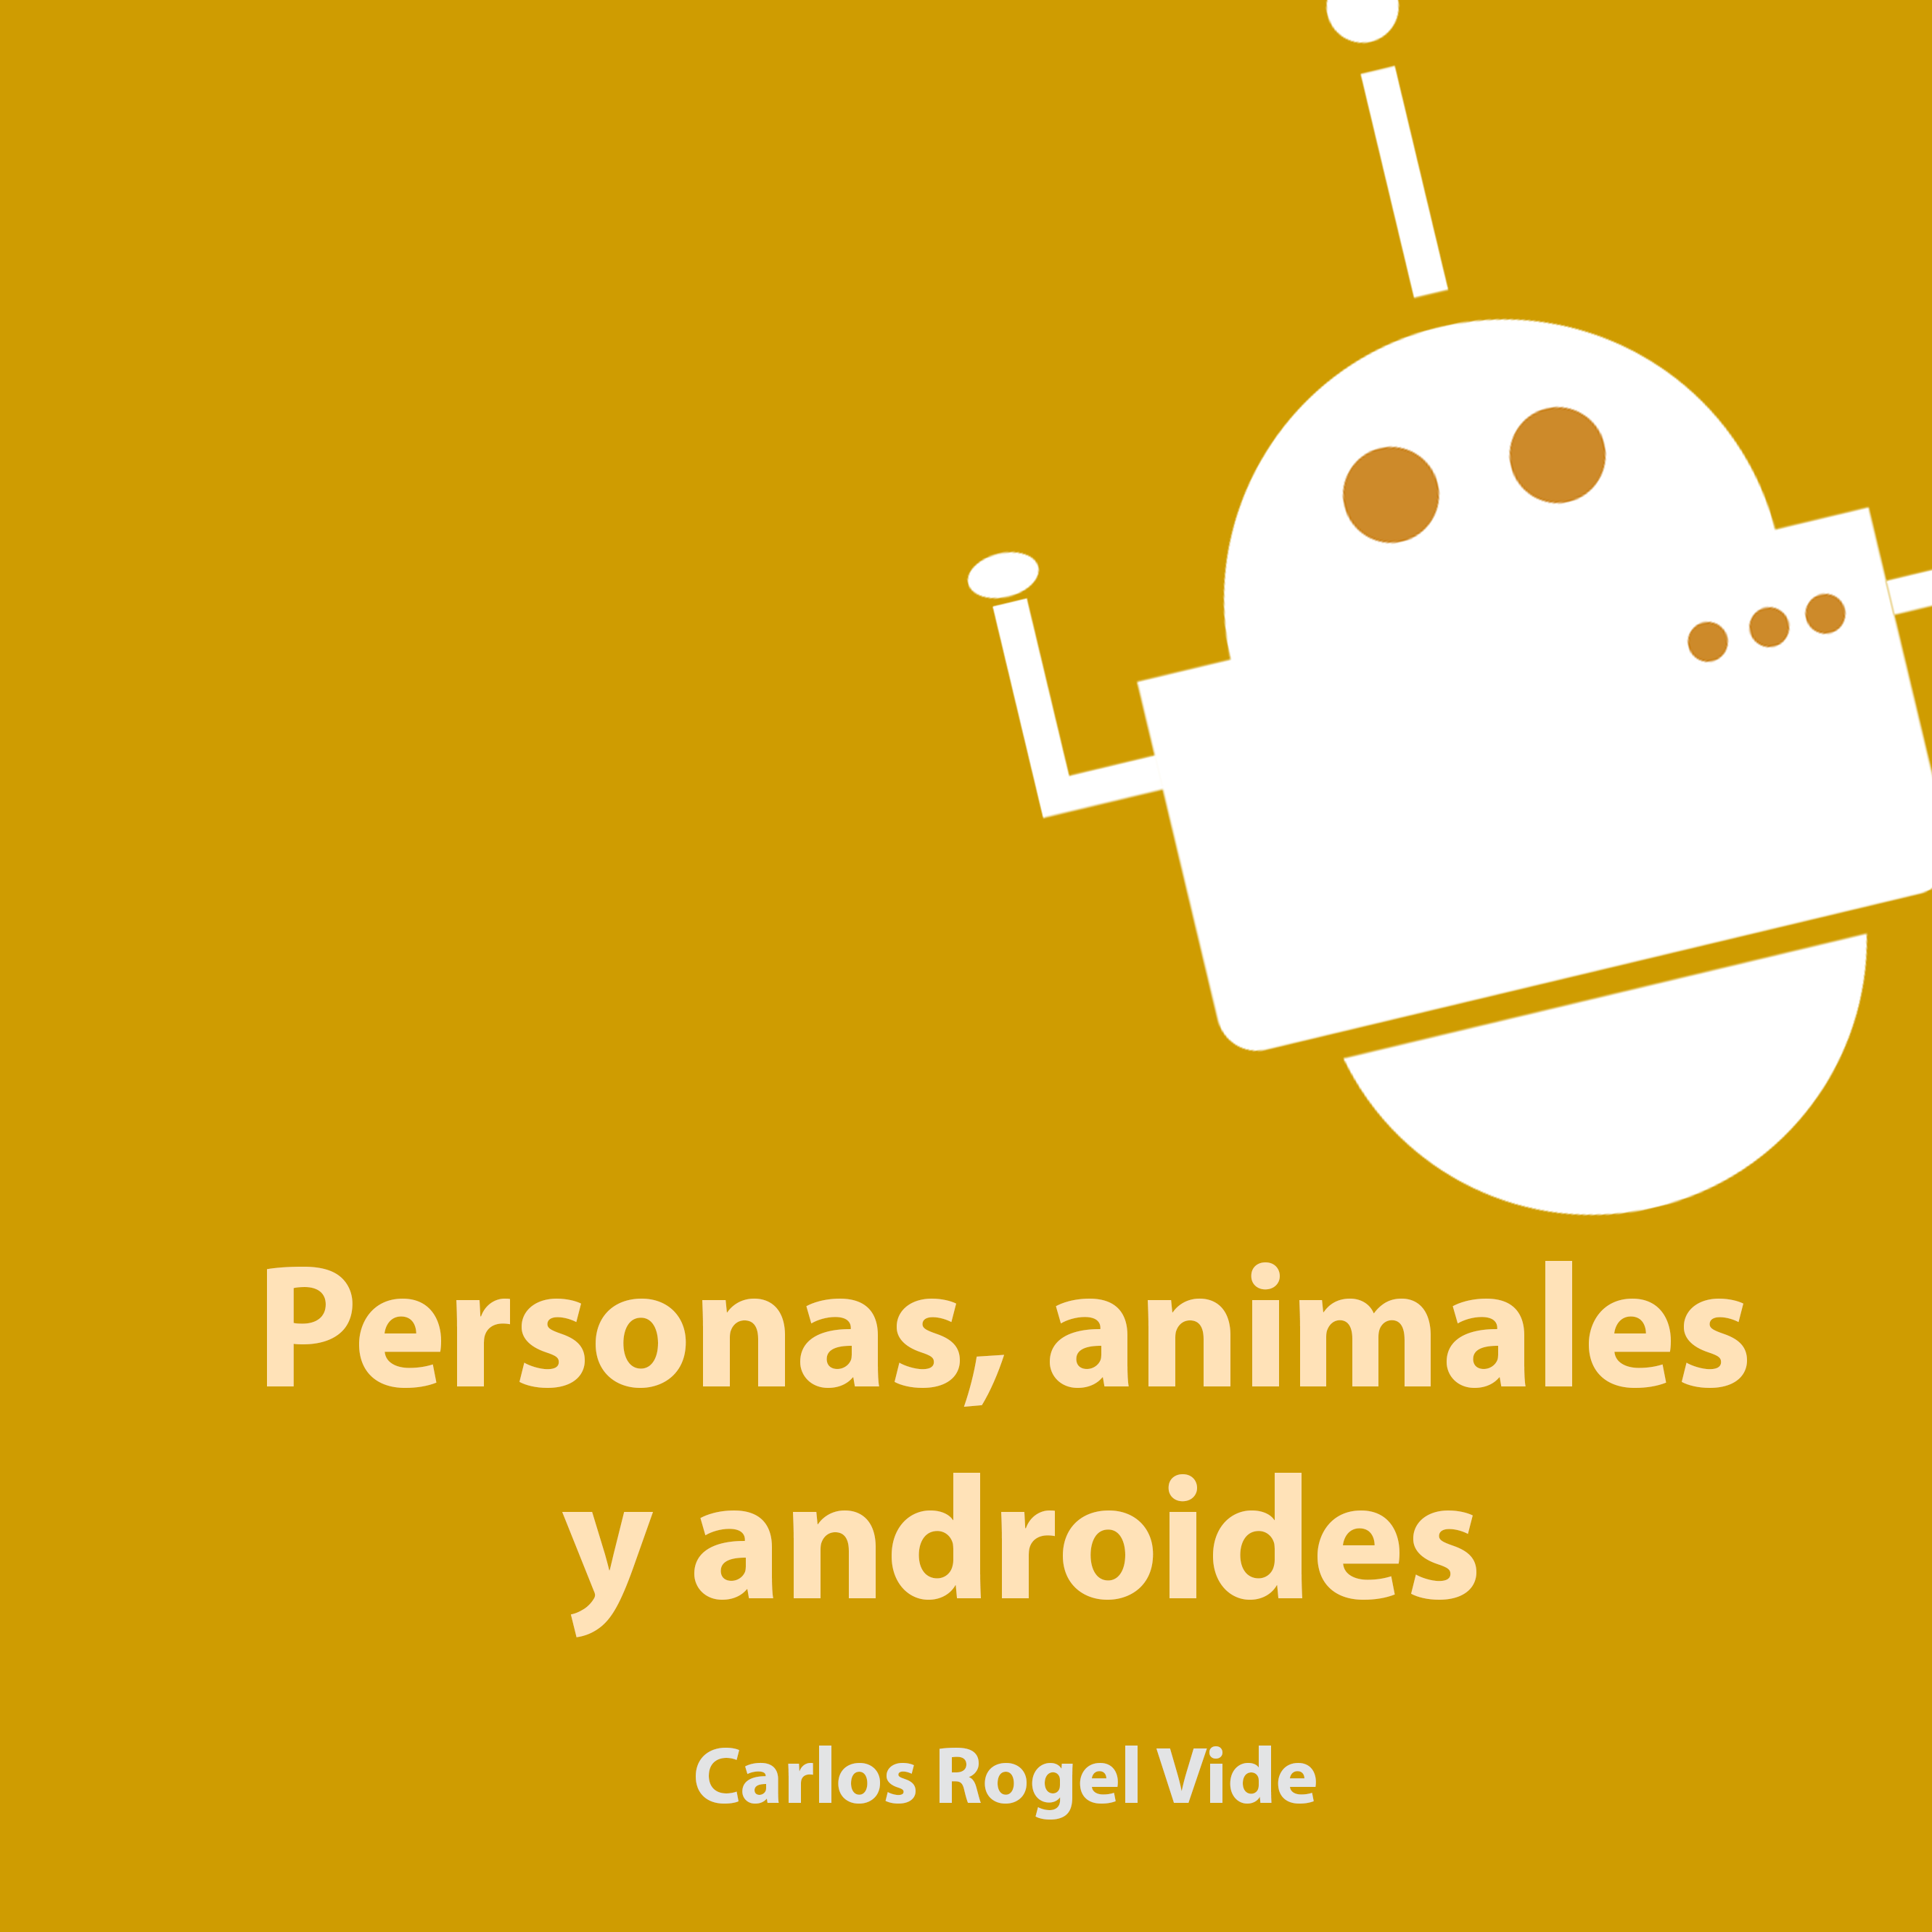 Personas, animales y androides